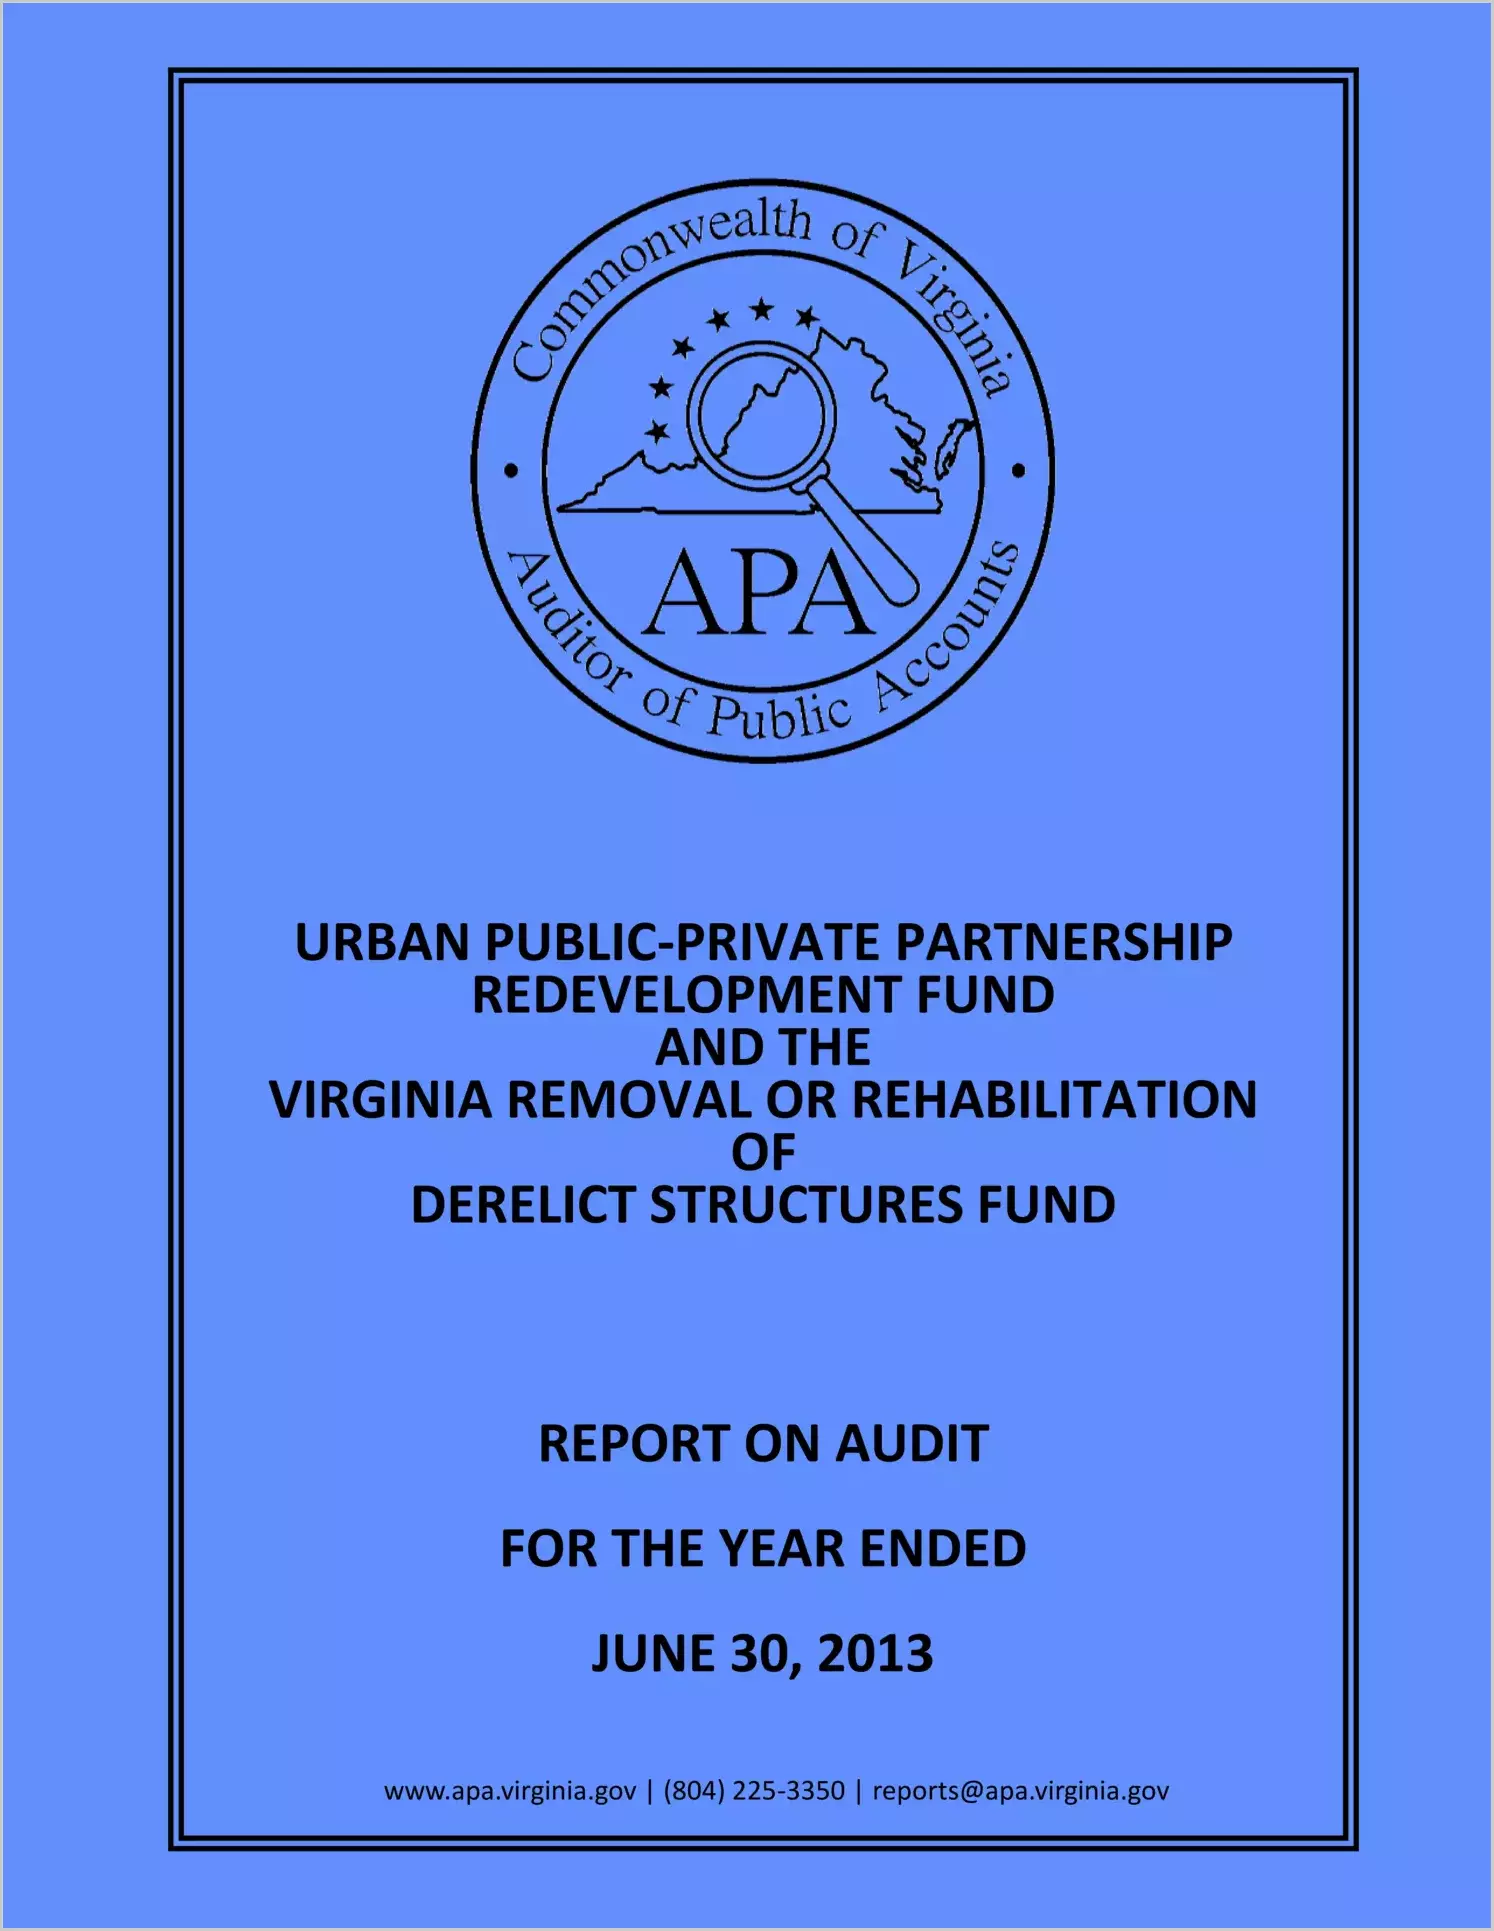 Urban Public-Private Partnership Redevelopment Fund and the Virginia Removal or Rehabilitation of Derelict Structures Fund for the fiscal year ended June 30, 2013